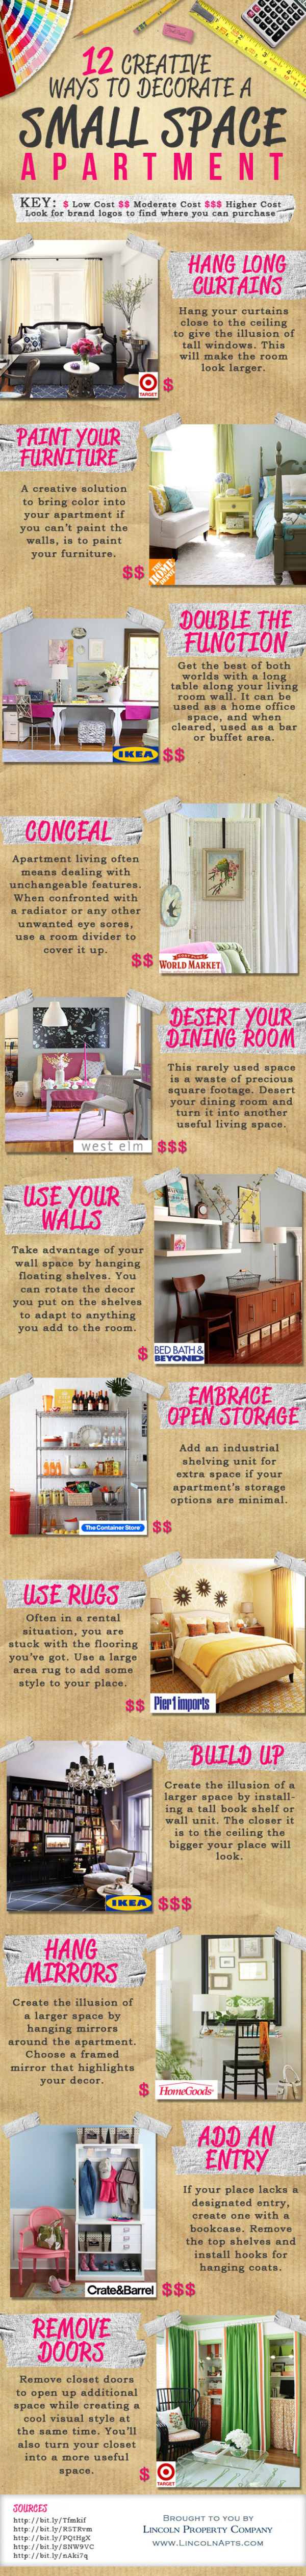 16 Creative Ways to Decorate a Small Space Infographic